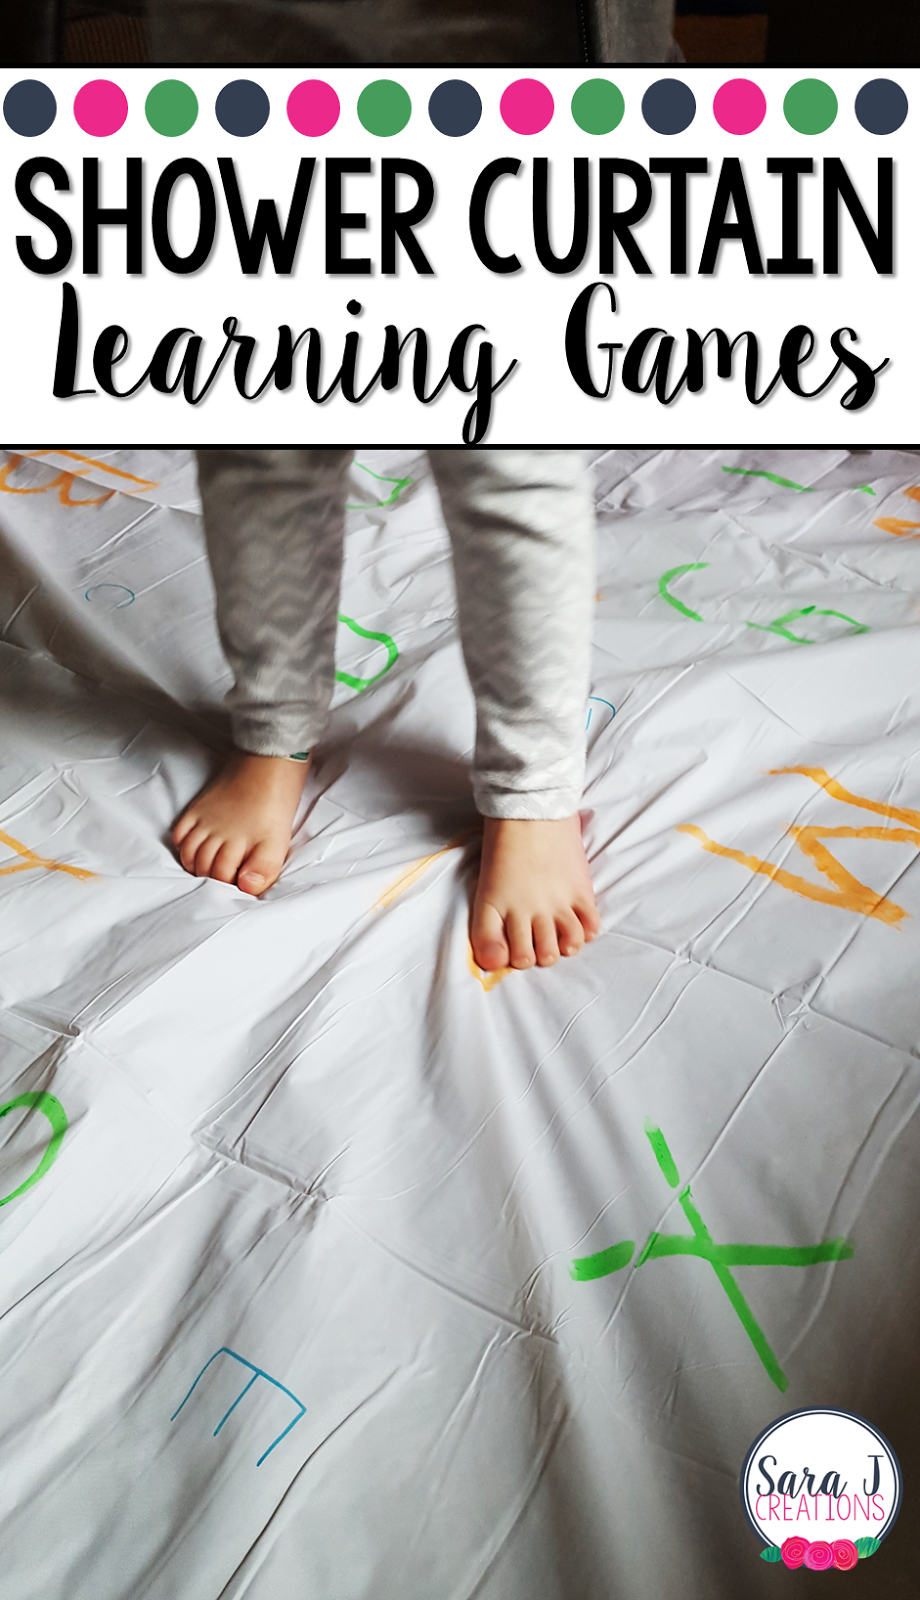 Create learning games on giant shower curtains with these easy directions and ideas. Perfect for ABCs, numbers, sight words, math problems and more.